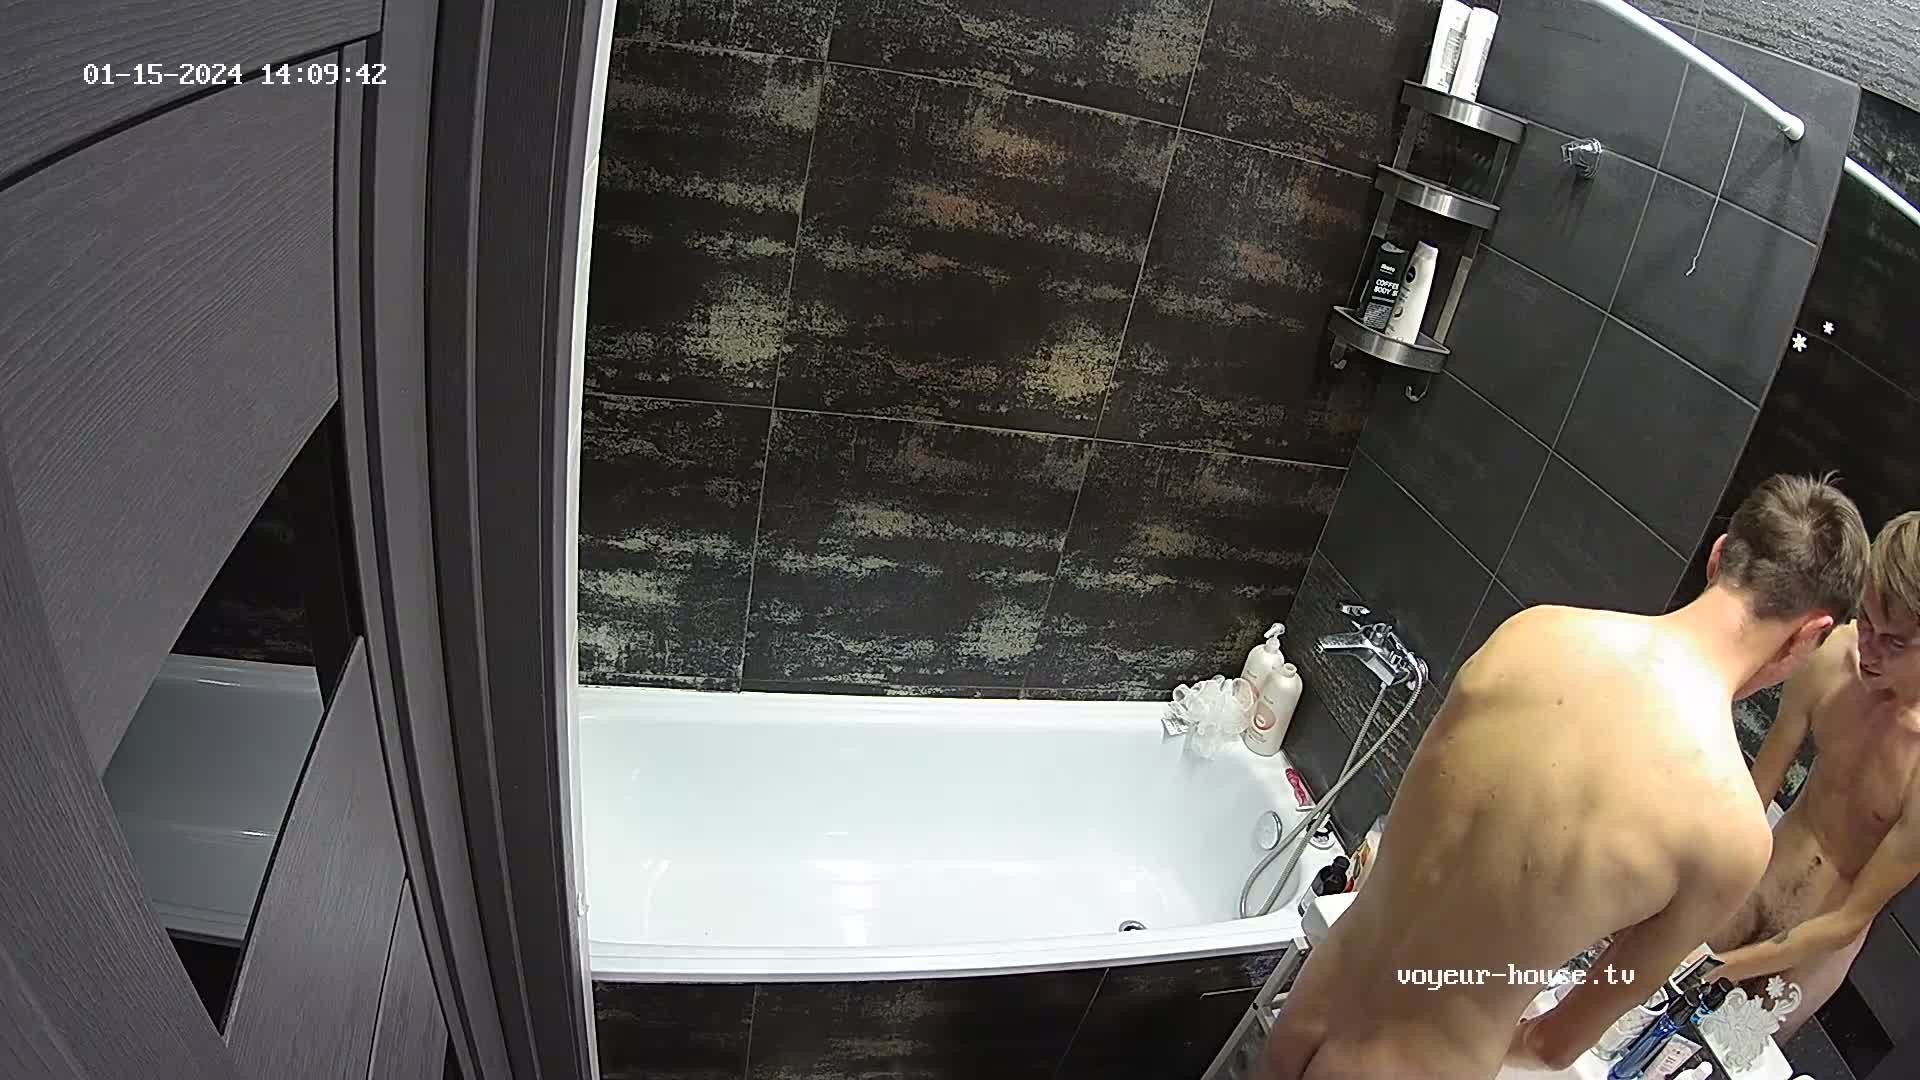 Westly washing cock at sink after Afternoon sex 15-01-2024